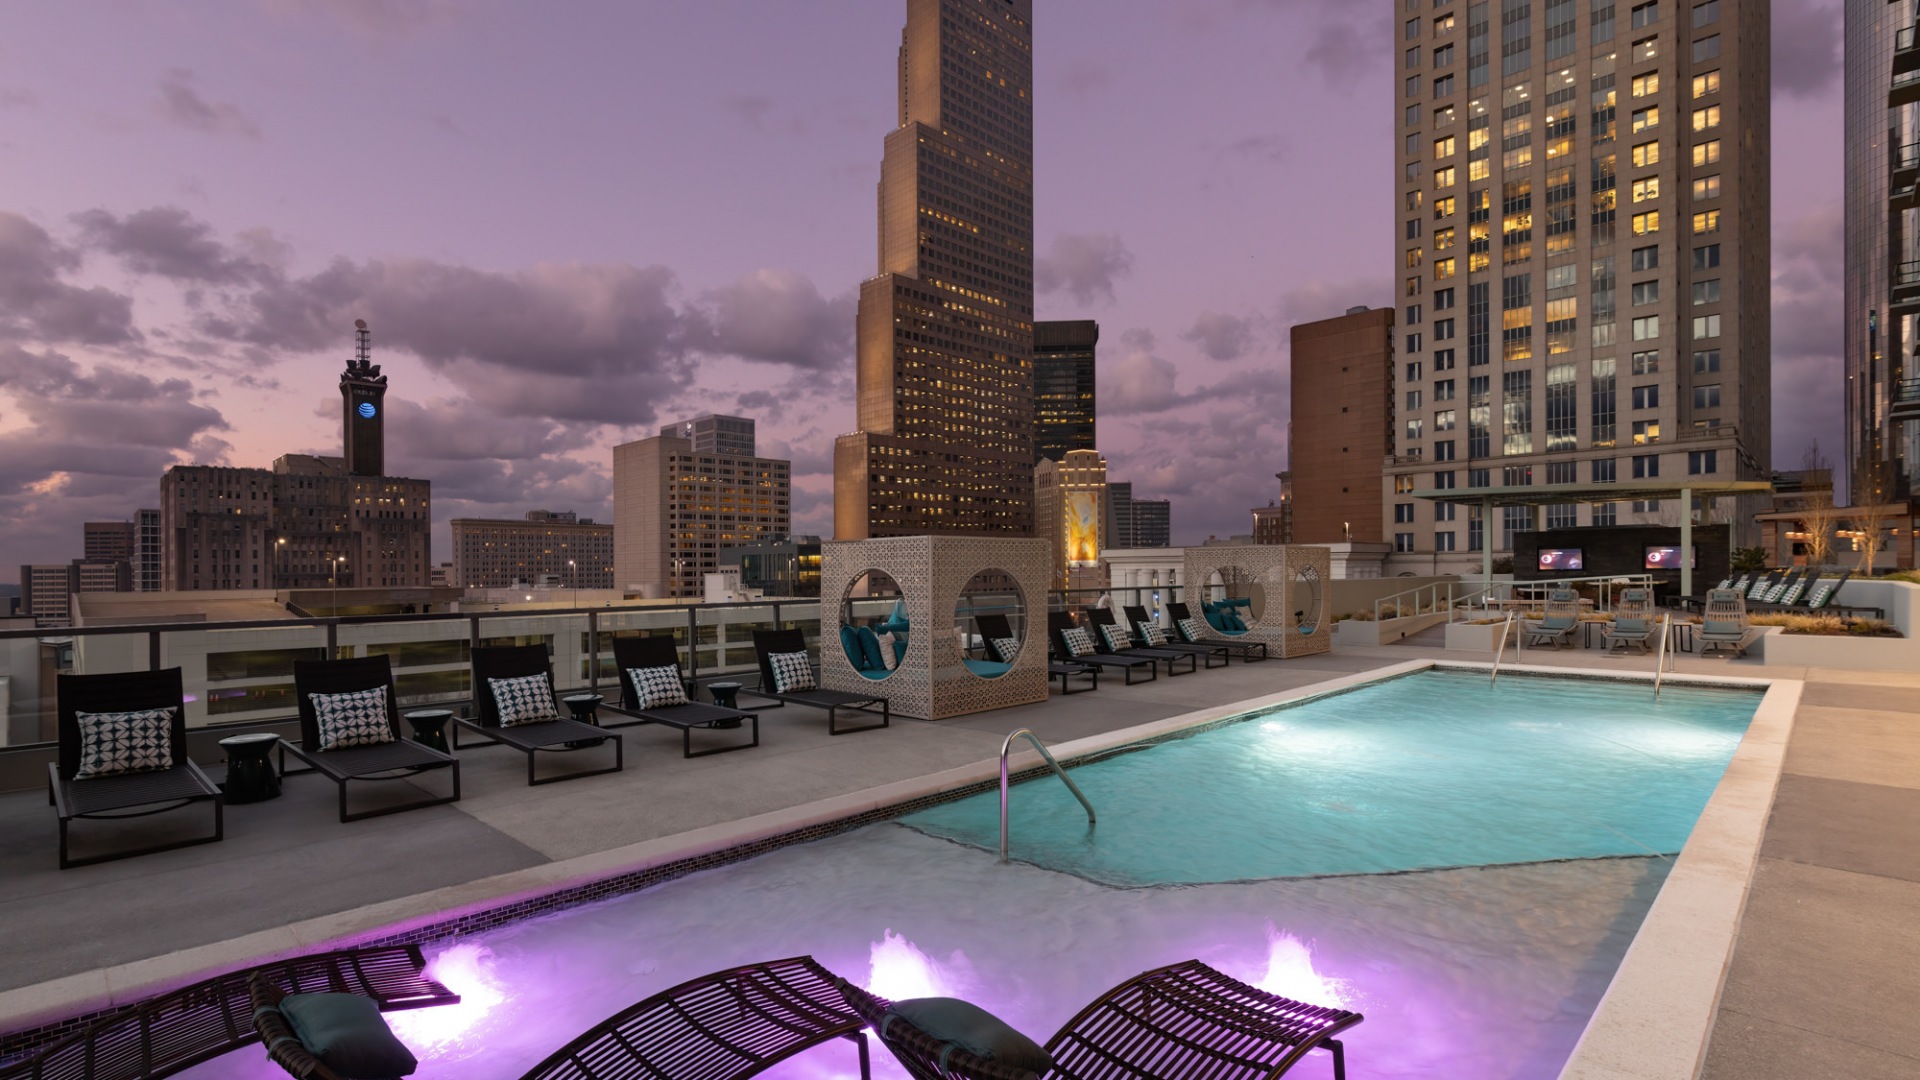 Peachtree rooftop pool and deck 